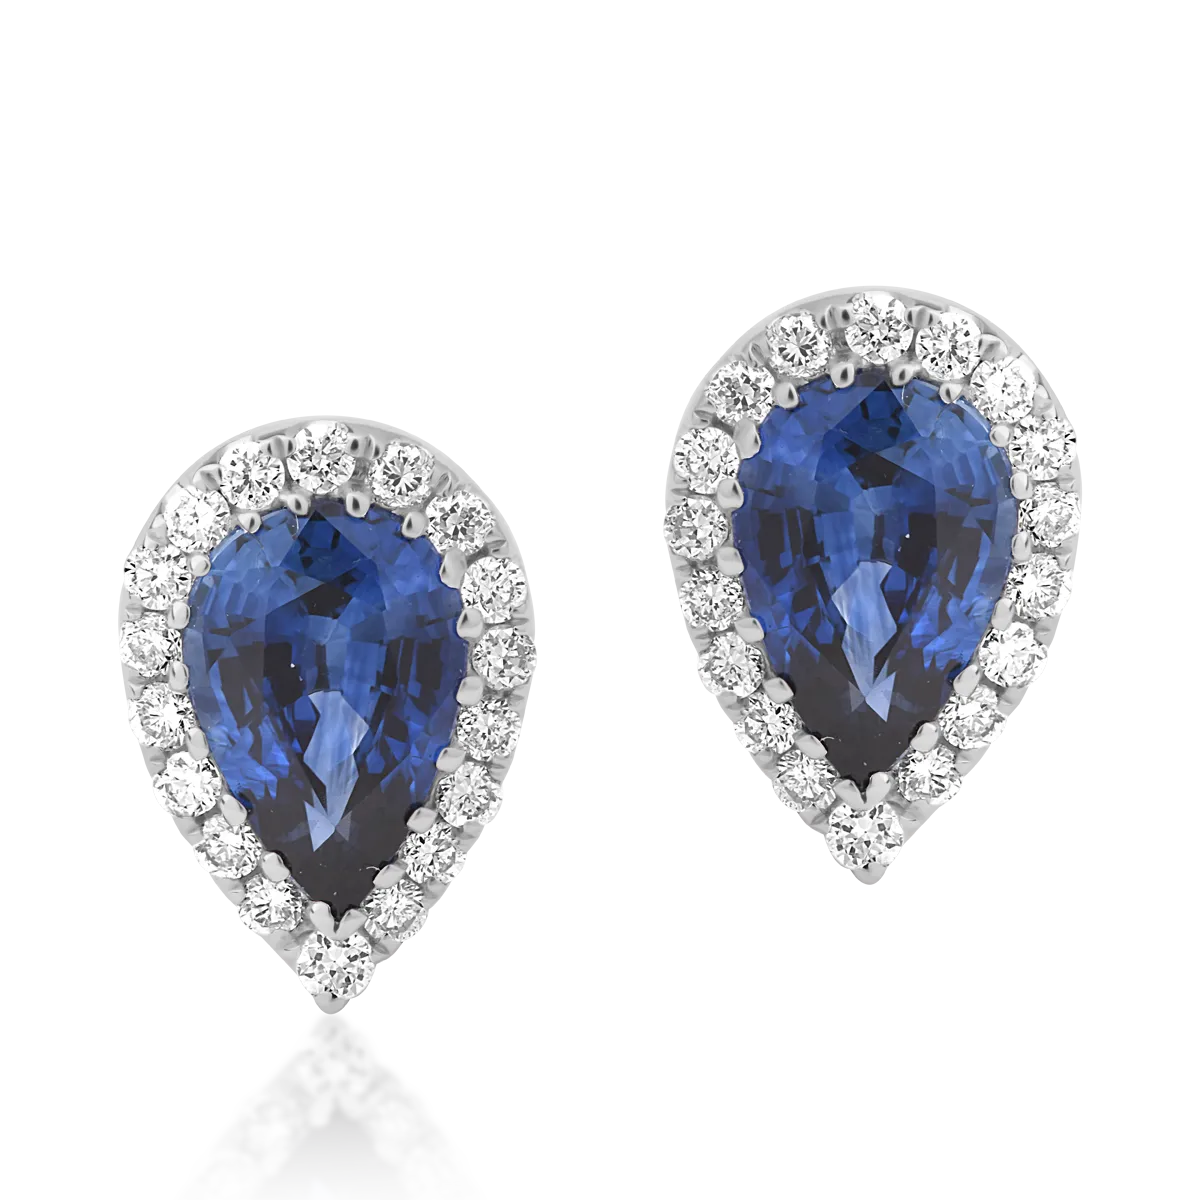 18K white gold earrings with sapphires of 0.9ct and diamonds of 0.14ct